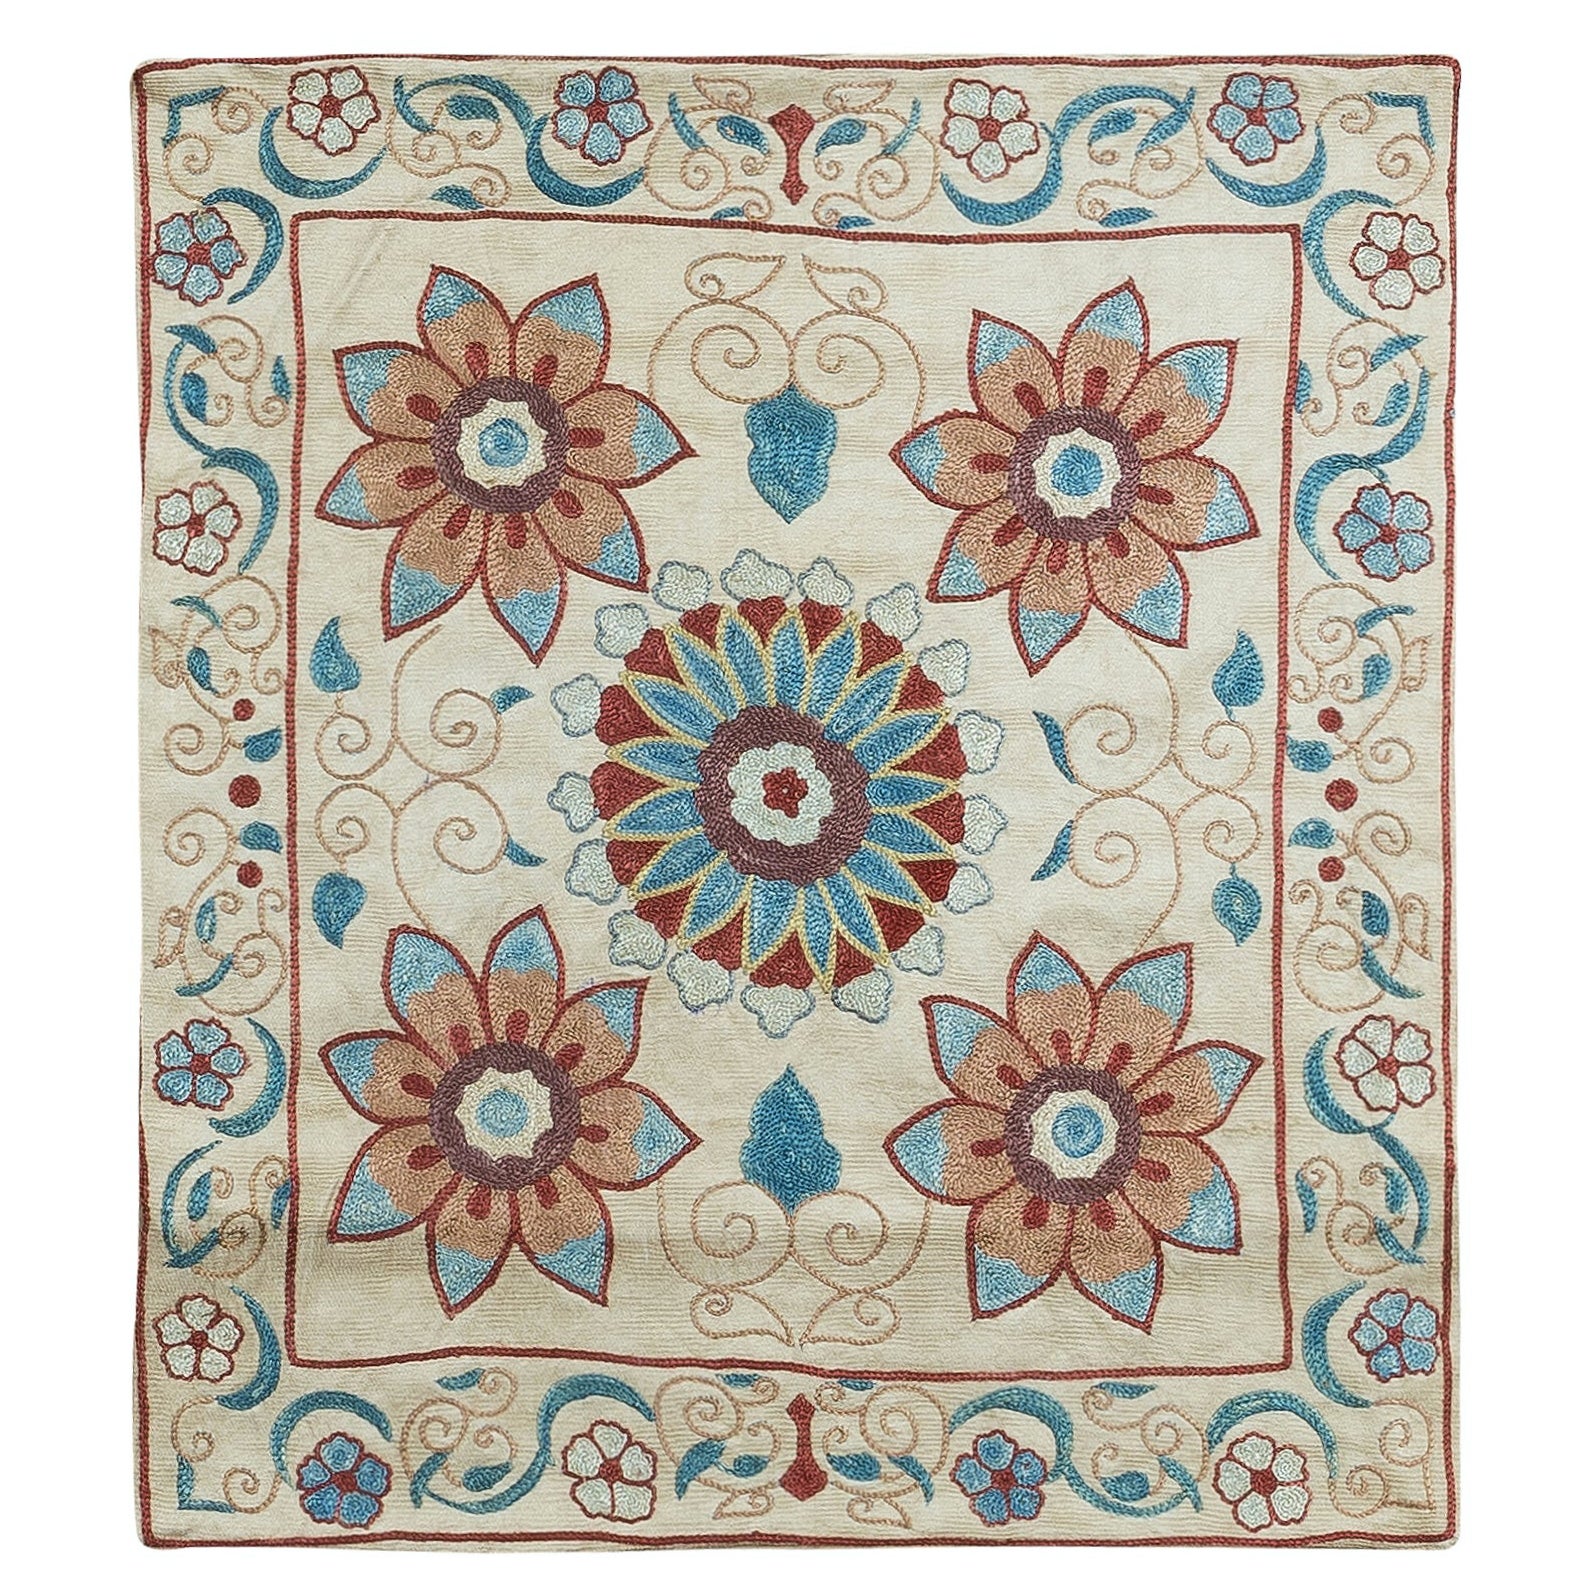 100% Silk Floral Embroidered Suzani Cushion Cover in Teal, Red and Cream For Sale